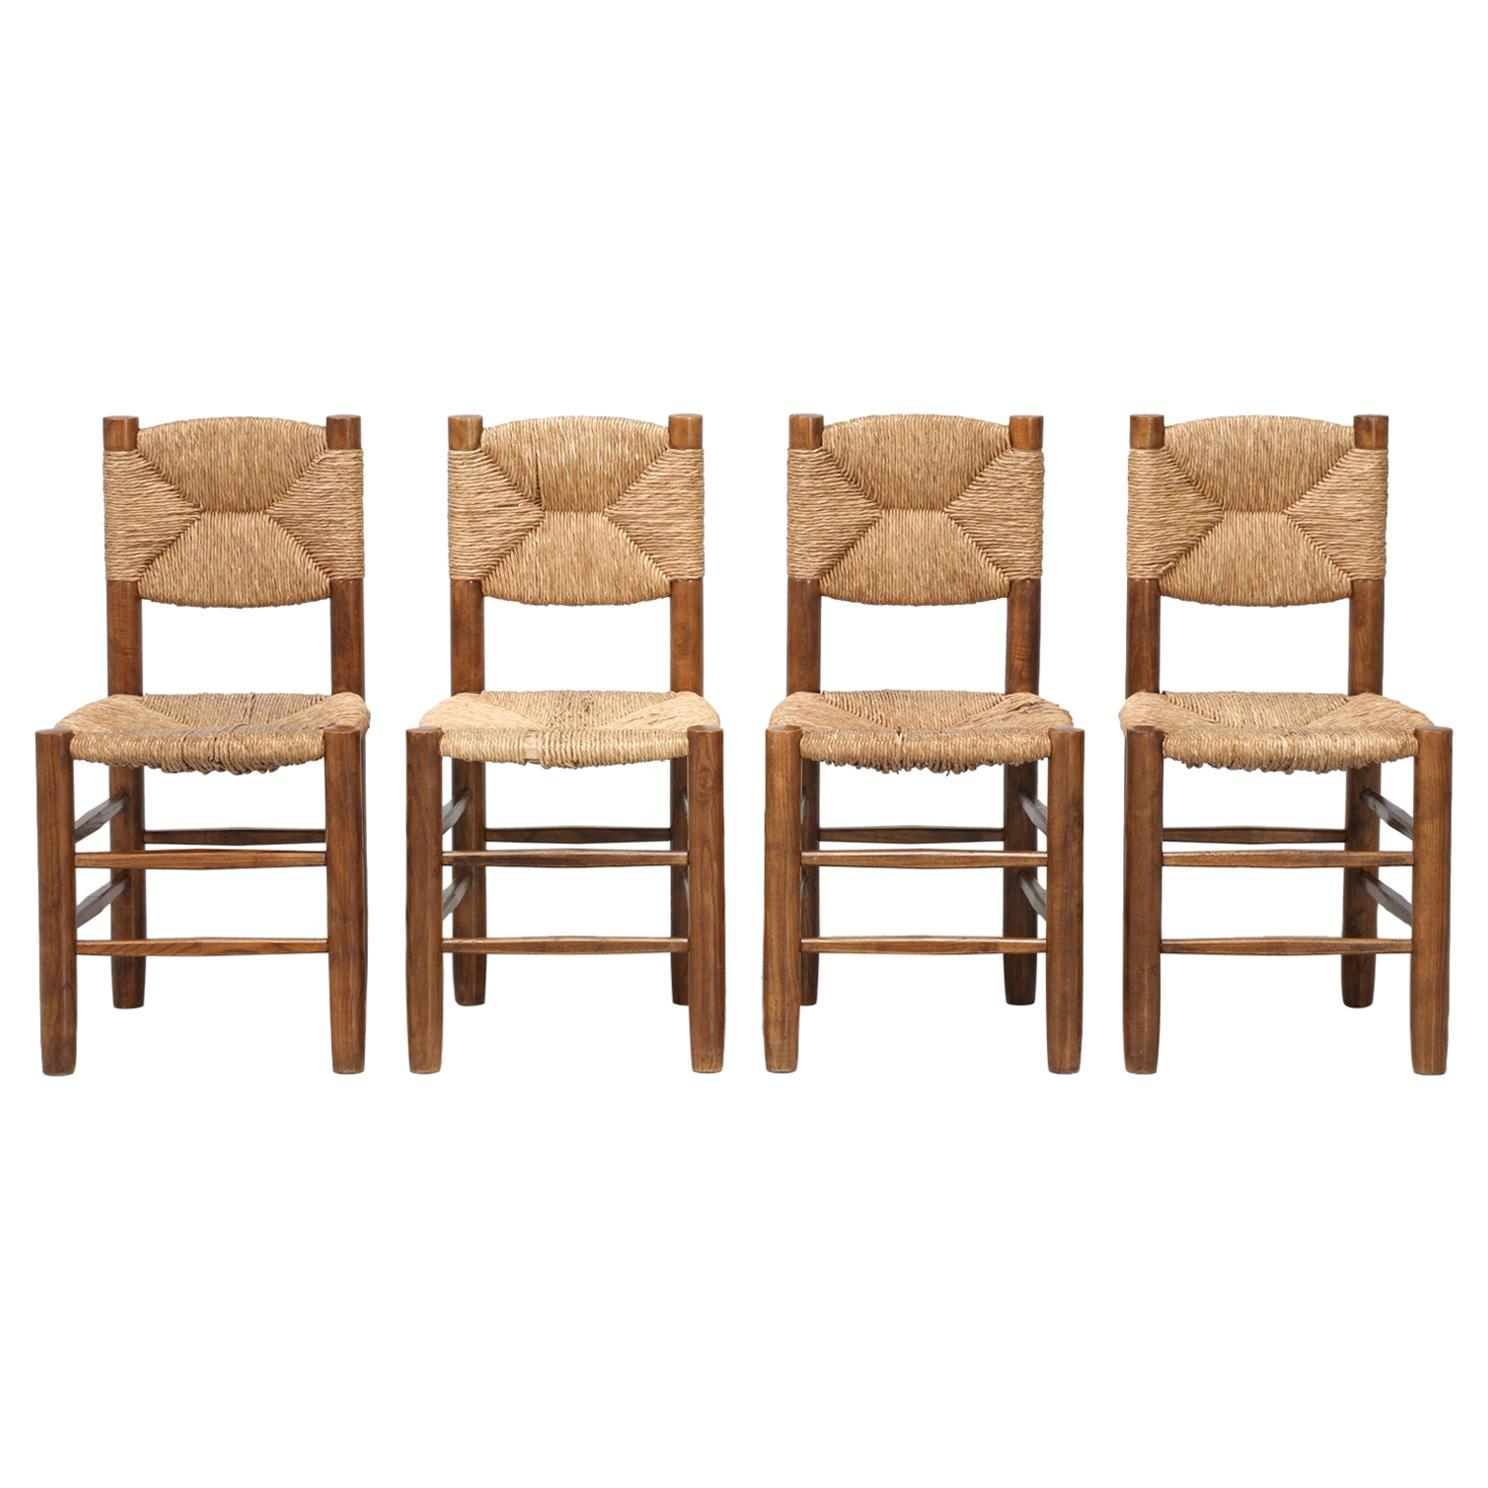 French Charlotte Perriand Bauche Chairs, Set of 4, Unrestored, circa 1950